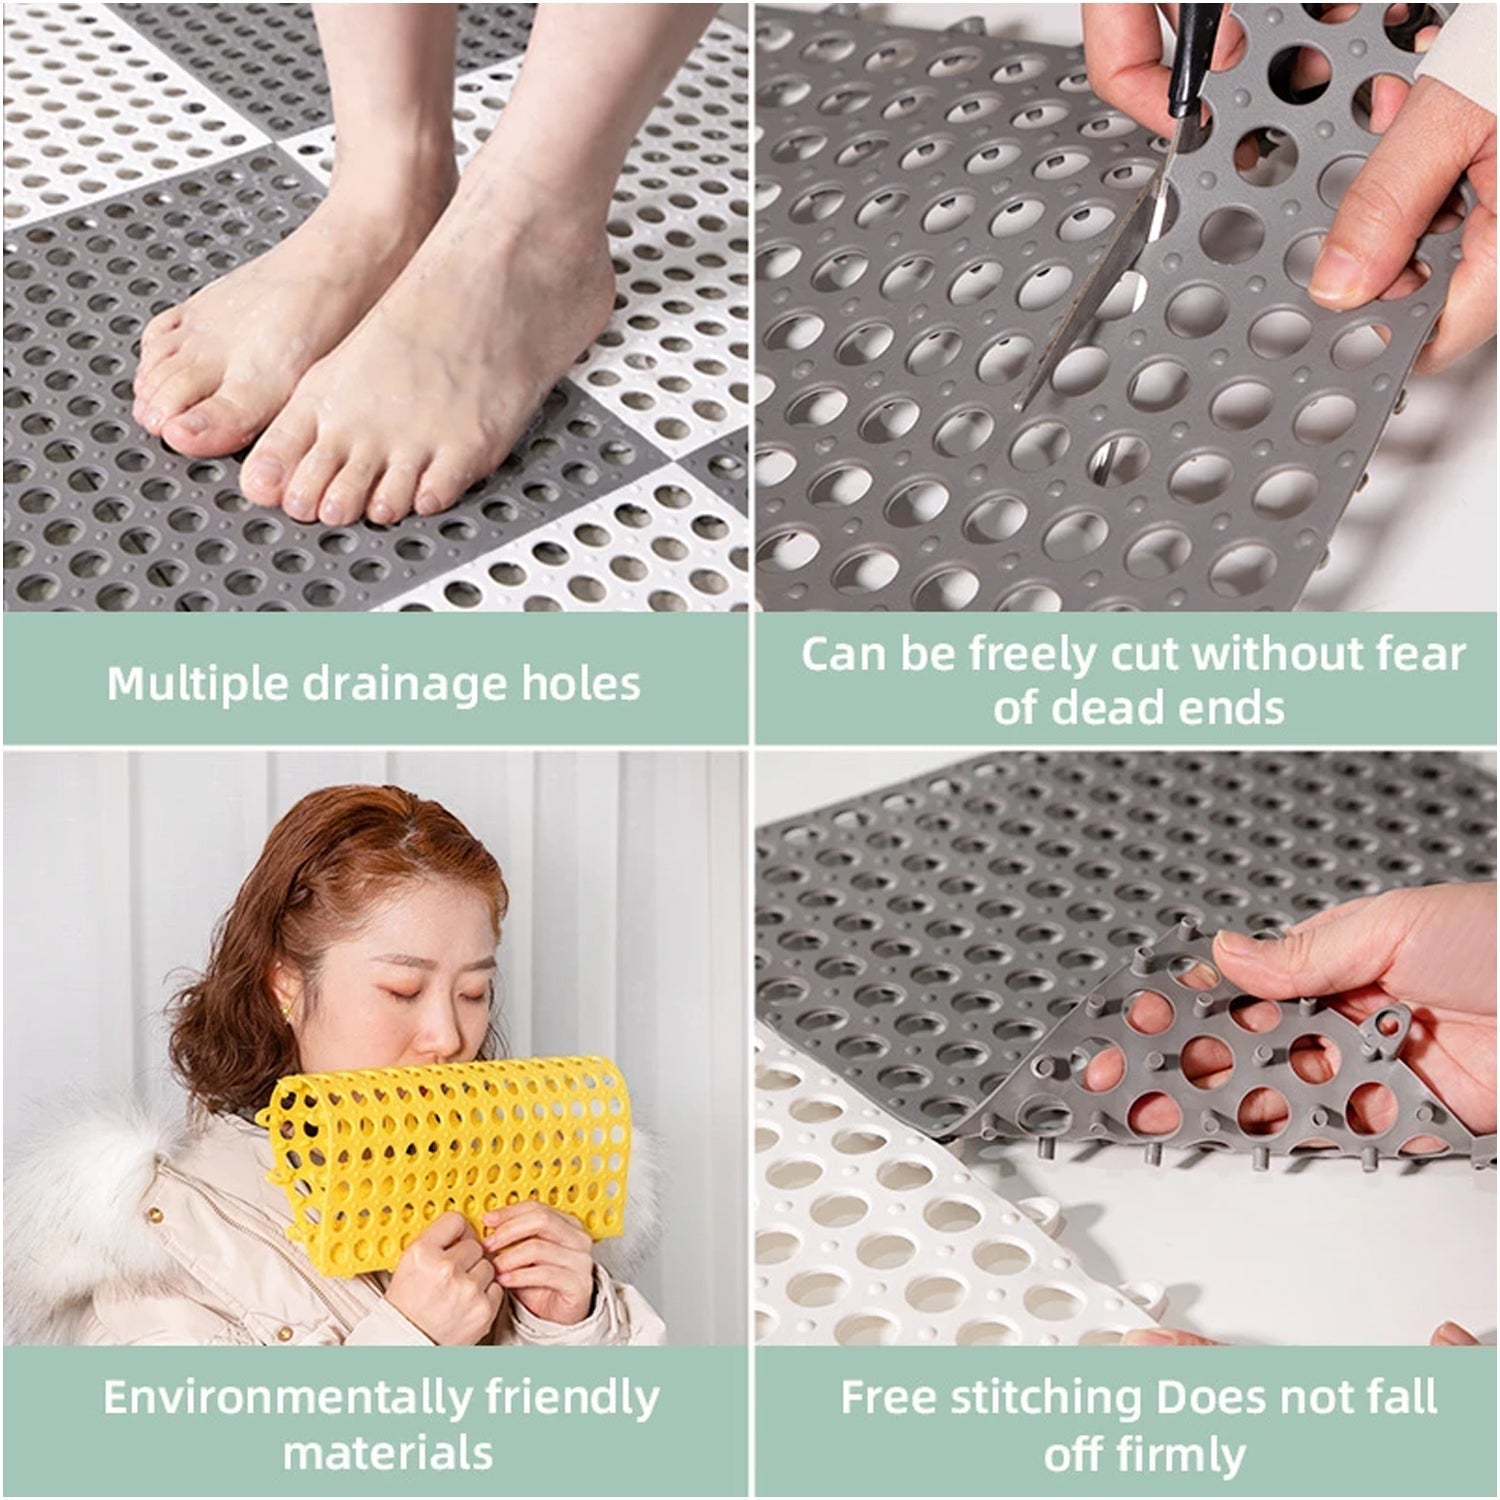 BATH ANTI SLIP MAT USED WHILE BATHING AND TOILET PURPOSES TO AVOID